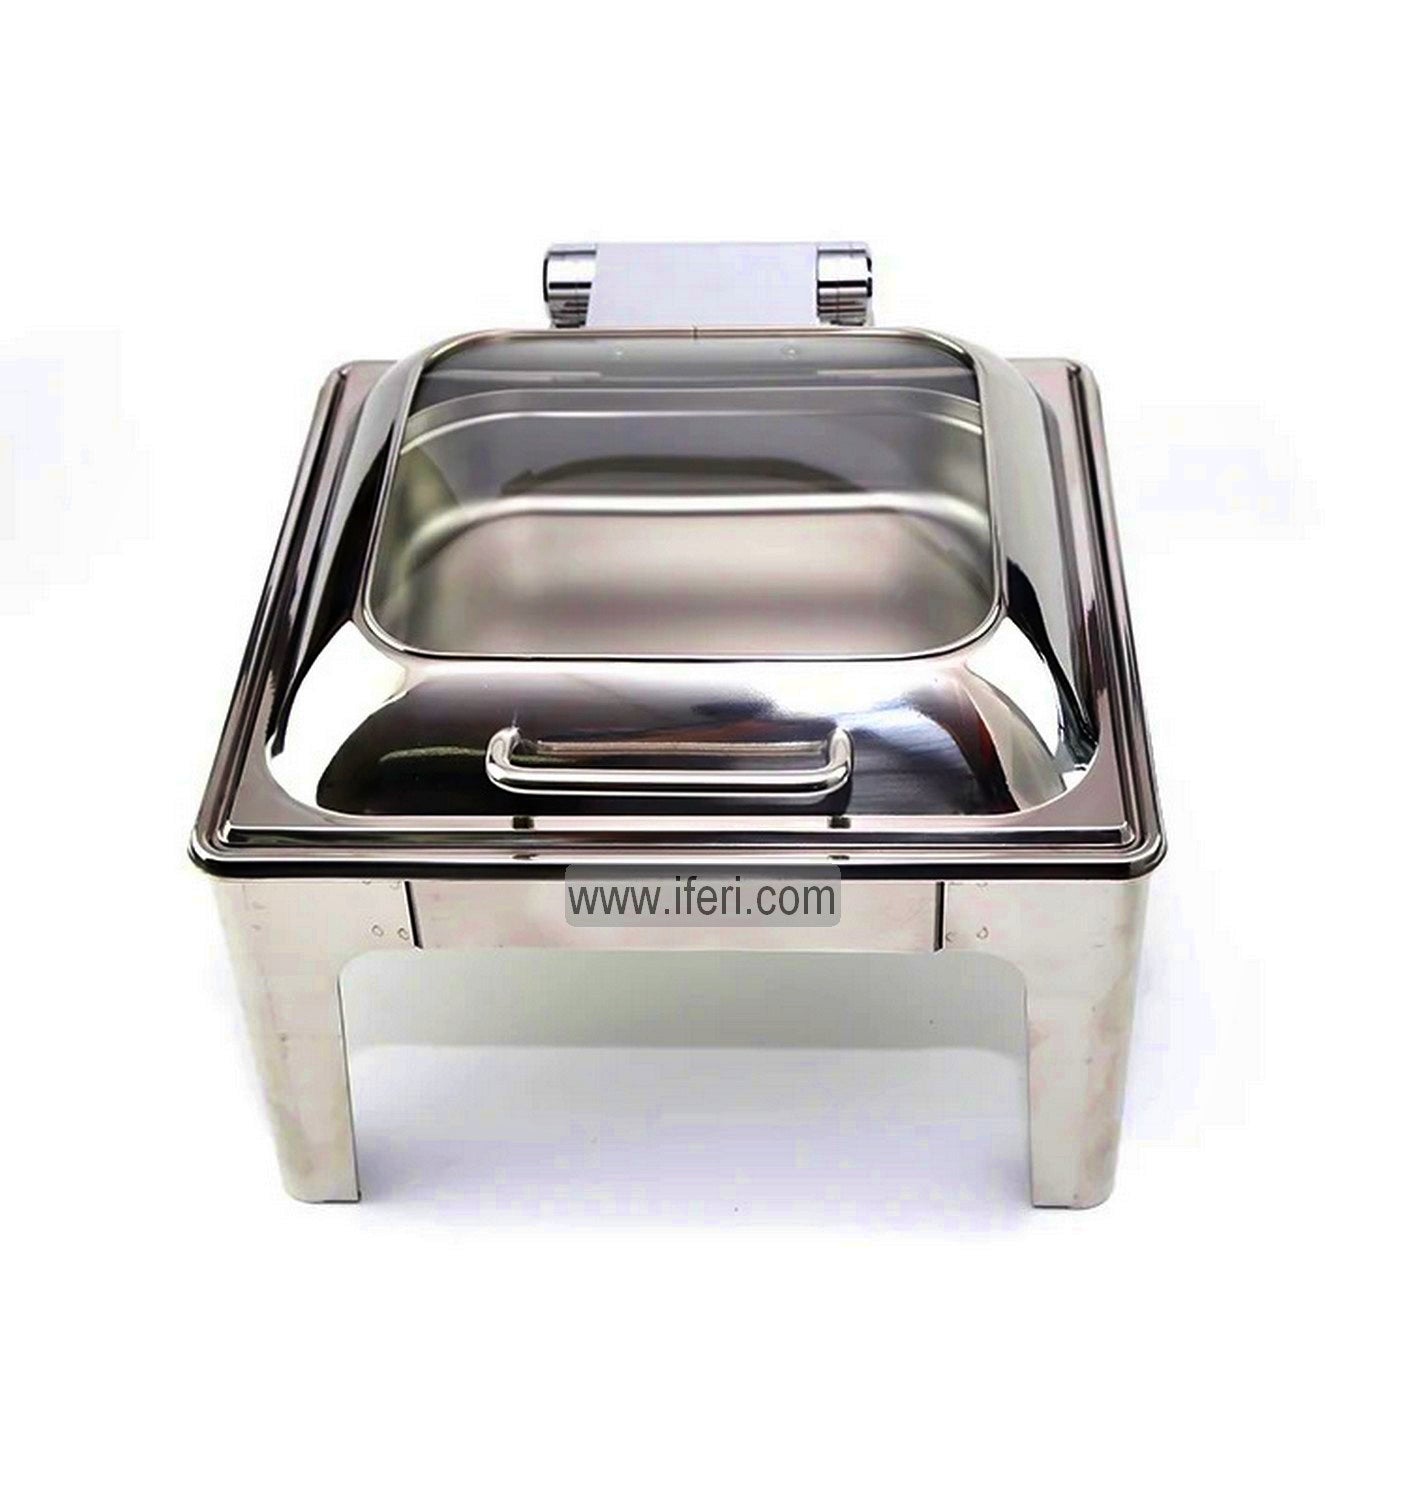 Banquet Chafing Dish with Glass Window EB7754